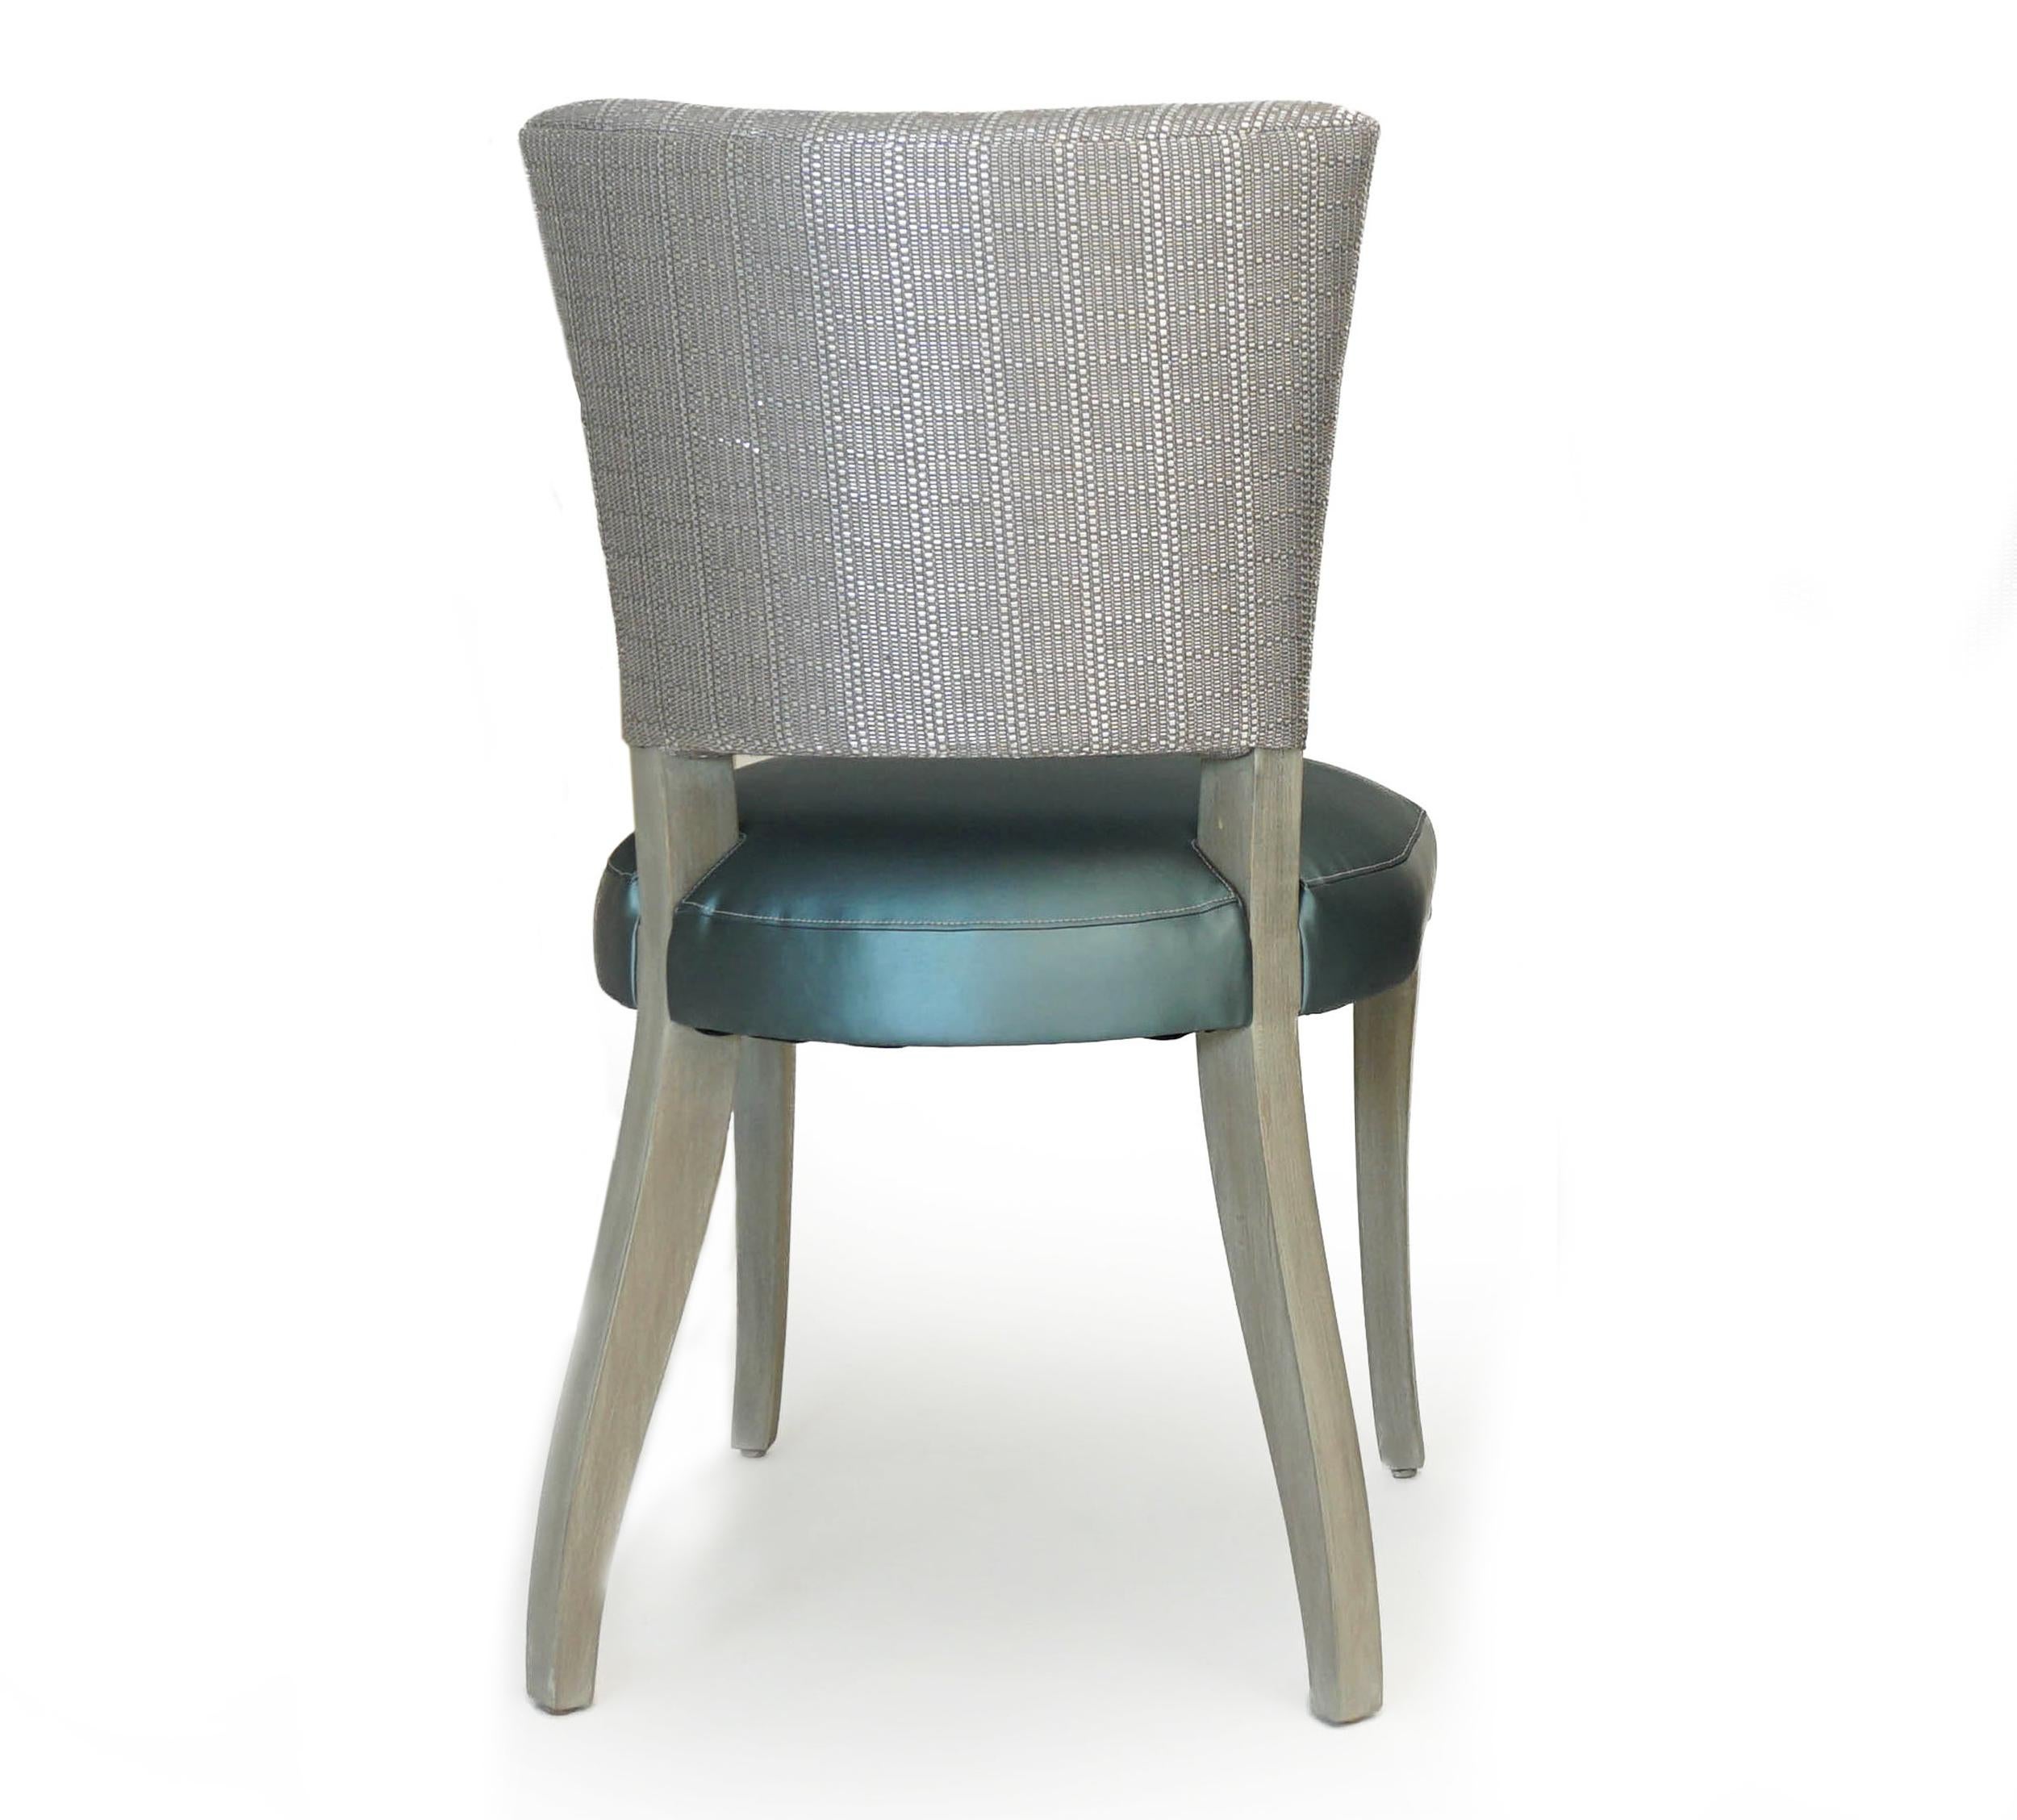 Transitional open back dining chair upholstered in blue and gold vinyl fabric with metallic woven back. This dining chair frame is solid hard maple featuring a Swedish finish. The sturdy saber legs and armless design make for easy dining. This chair